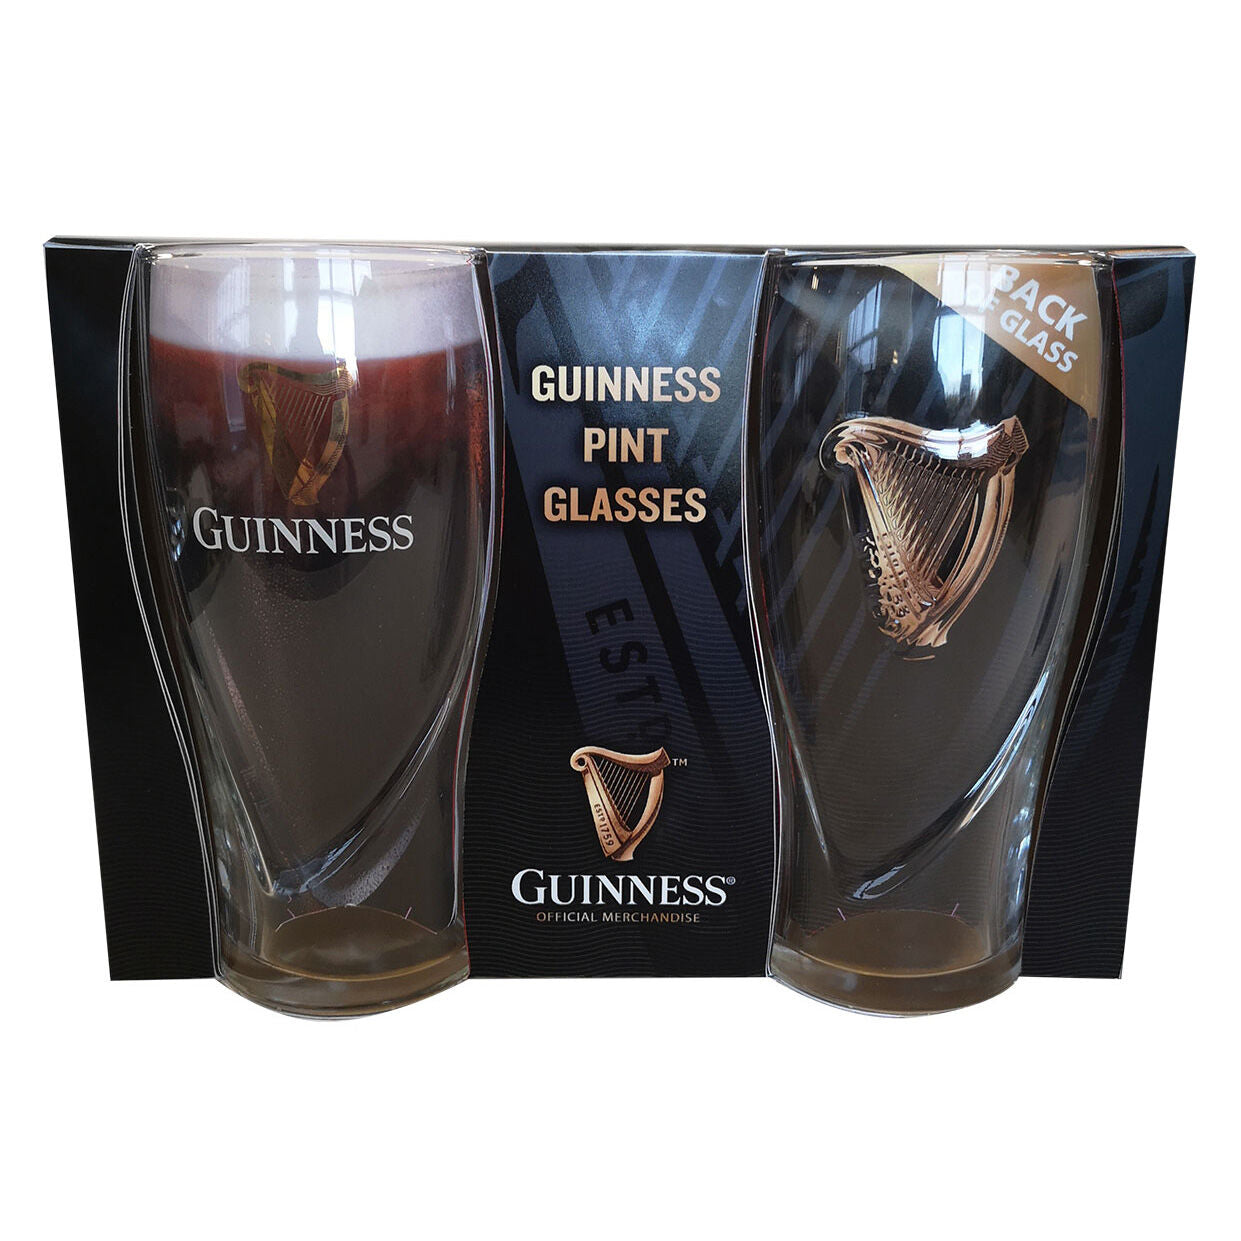 A pack of two Guinness UK-branded draught glasses with harp logos, presented in a gift box.